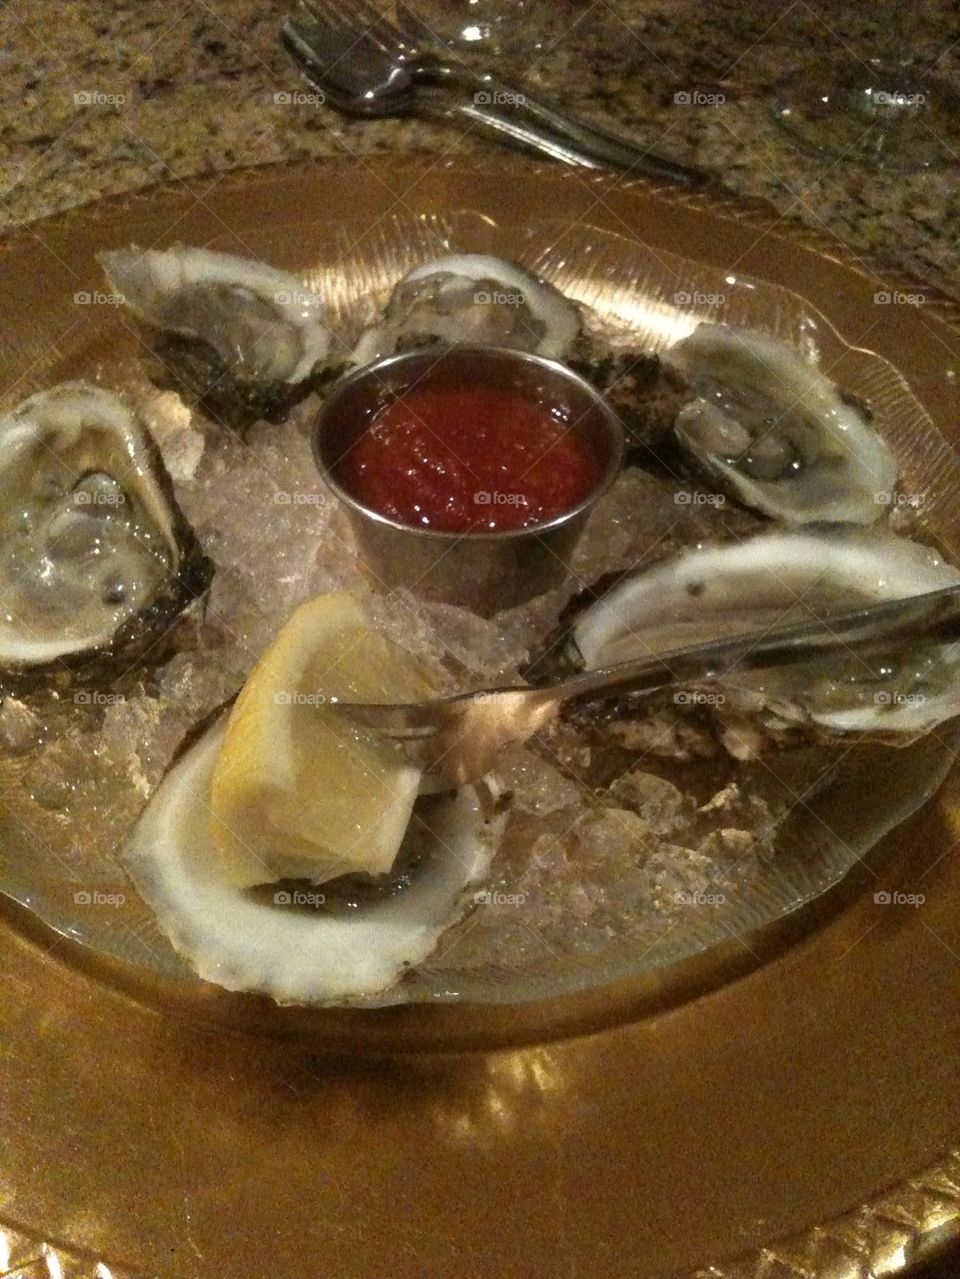 Oysters on the half shell